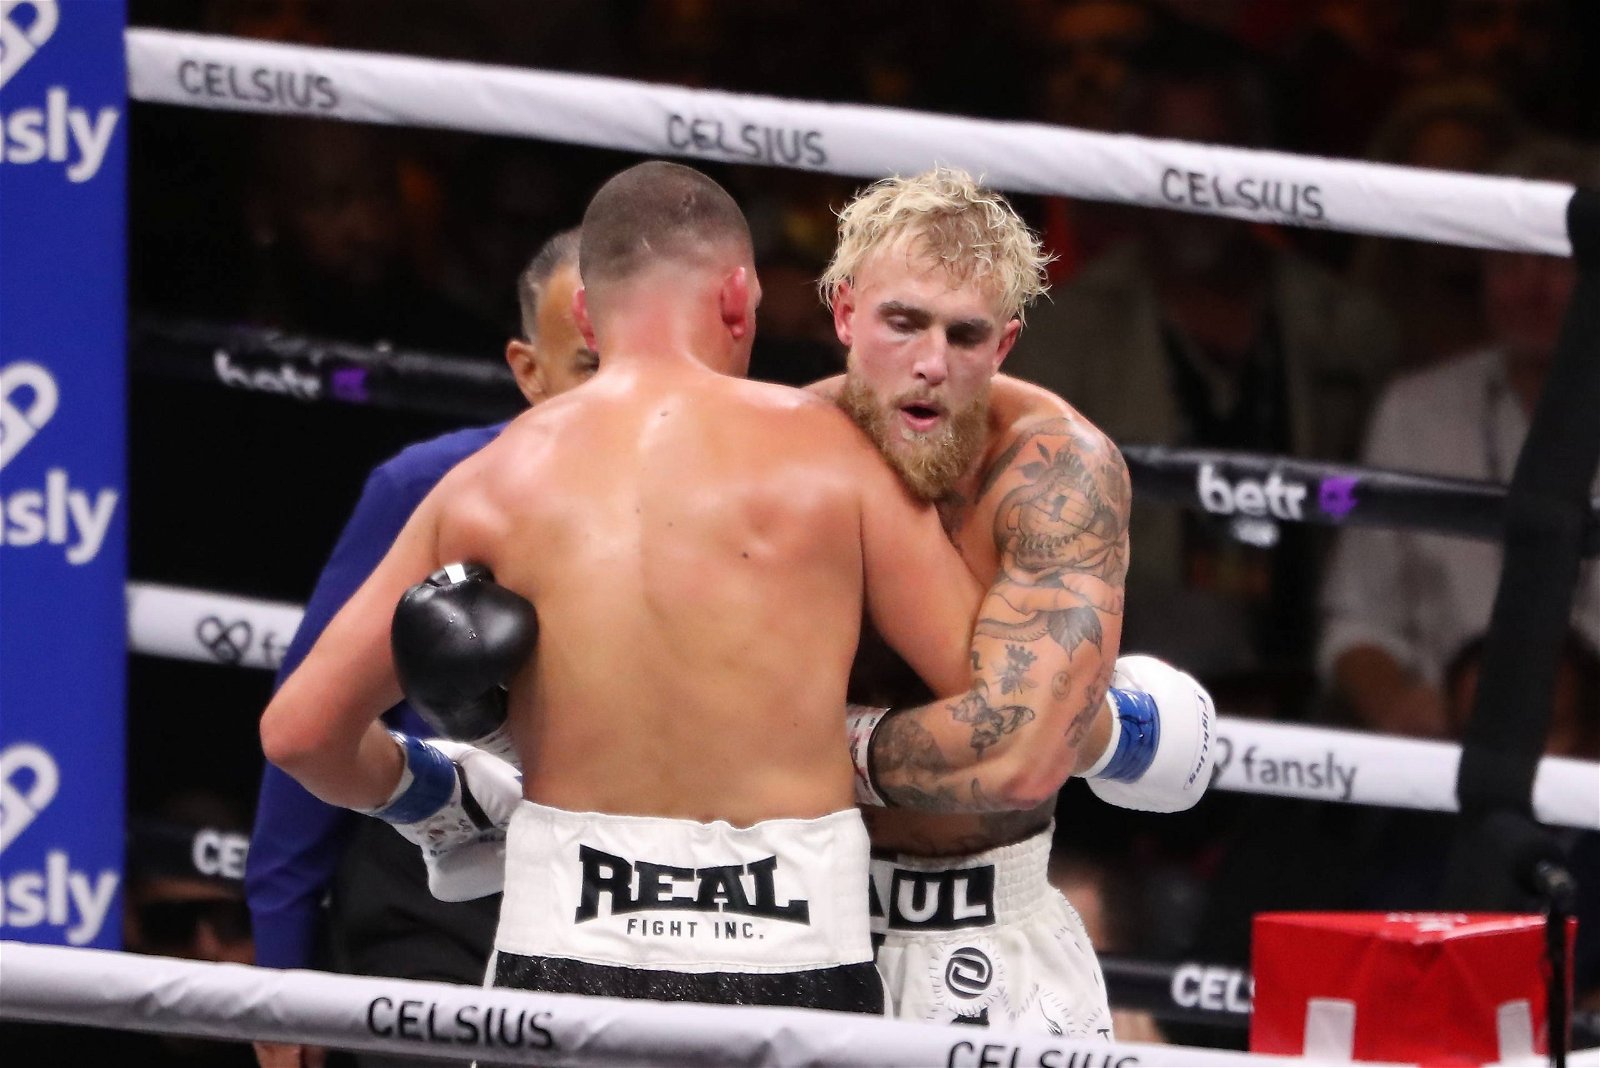 Jake Paul and Nate Diaz explain mediocre PPV bout